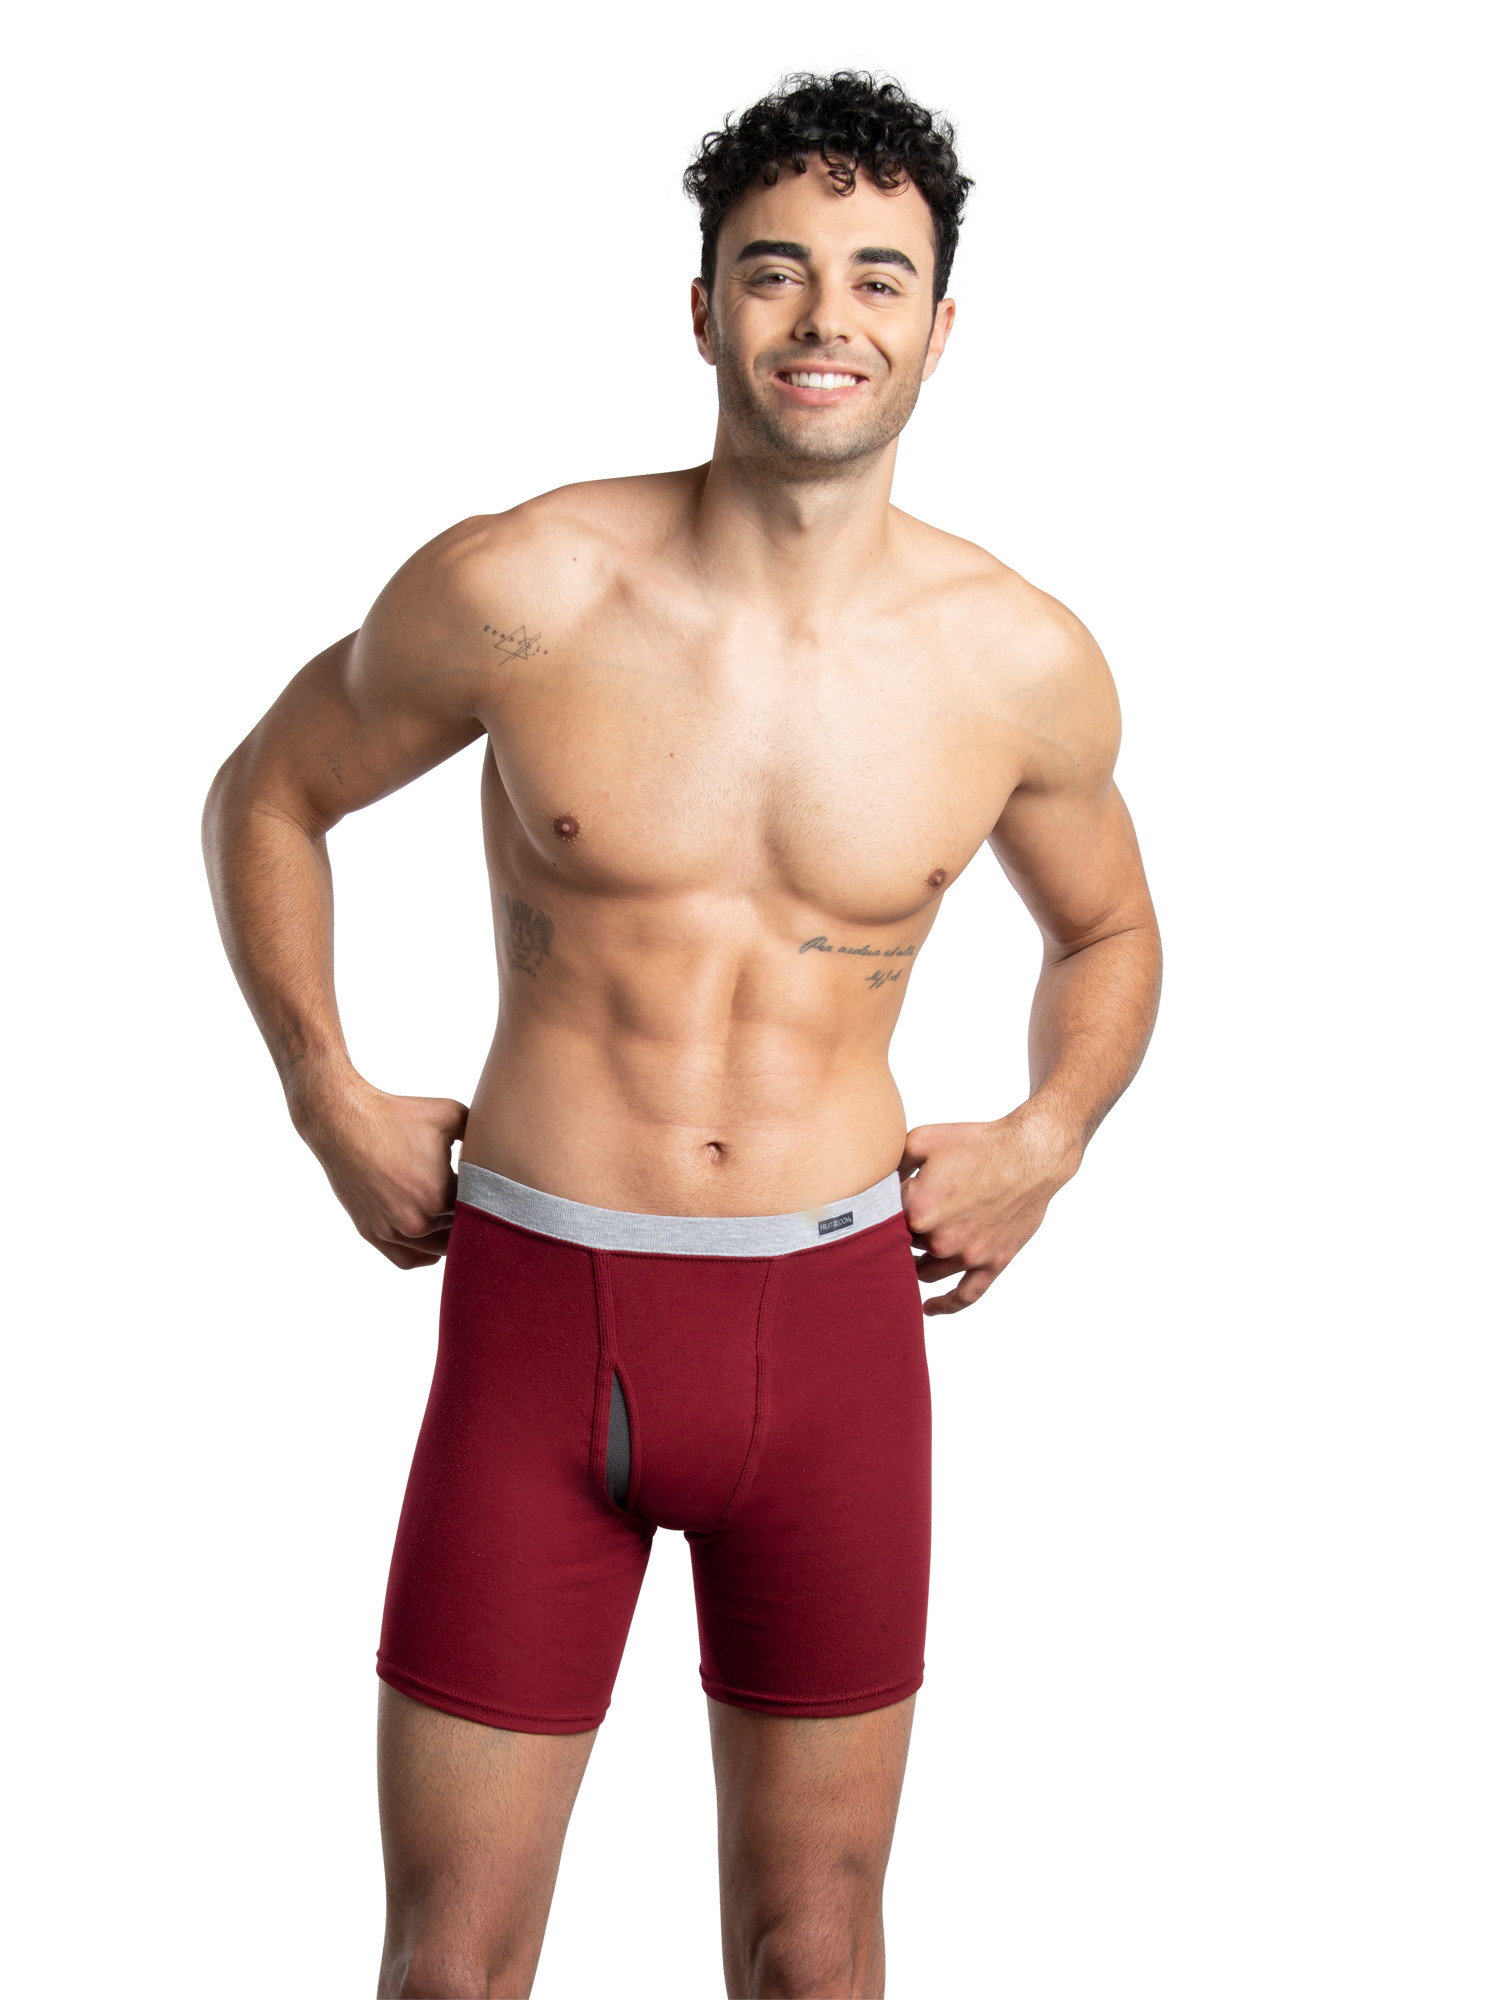 Fruit of the Loom Men's CoolZone Fly Boxer Briefs, 6 Pack - image 4 of 16